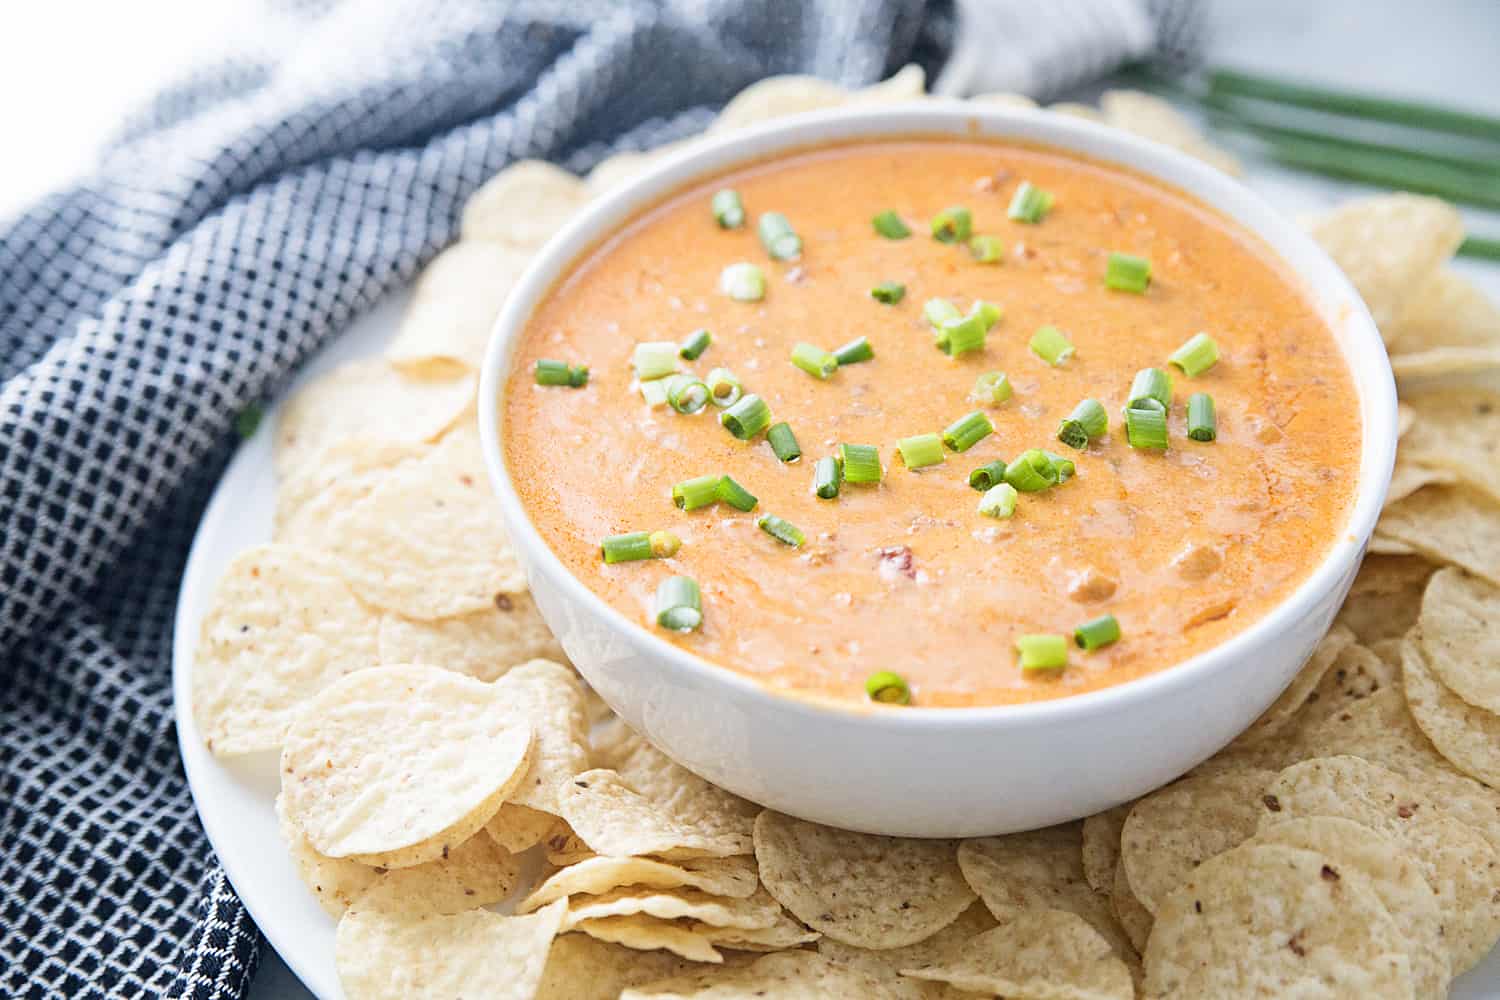 Ready for an extra cheesy, slightly spicy appetizer family and friends will devour in record time? Whip up some easy chorizo cheese dip. Your guests--and your taste buds--will thank you. #halfscratched #chorizo #chorizodip #appetizer #cheese #easyrecipe #baking #cooking #holidayrecipe #gamedayrecipe